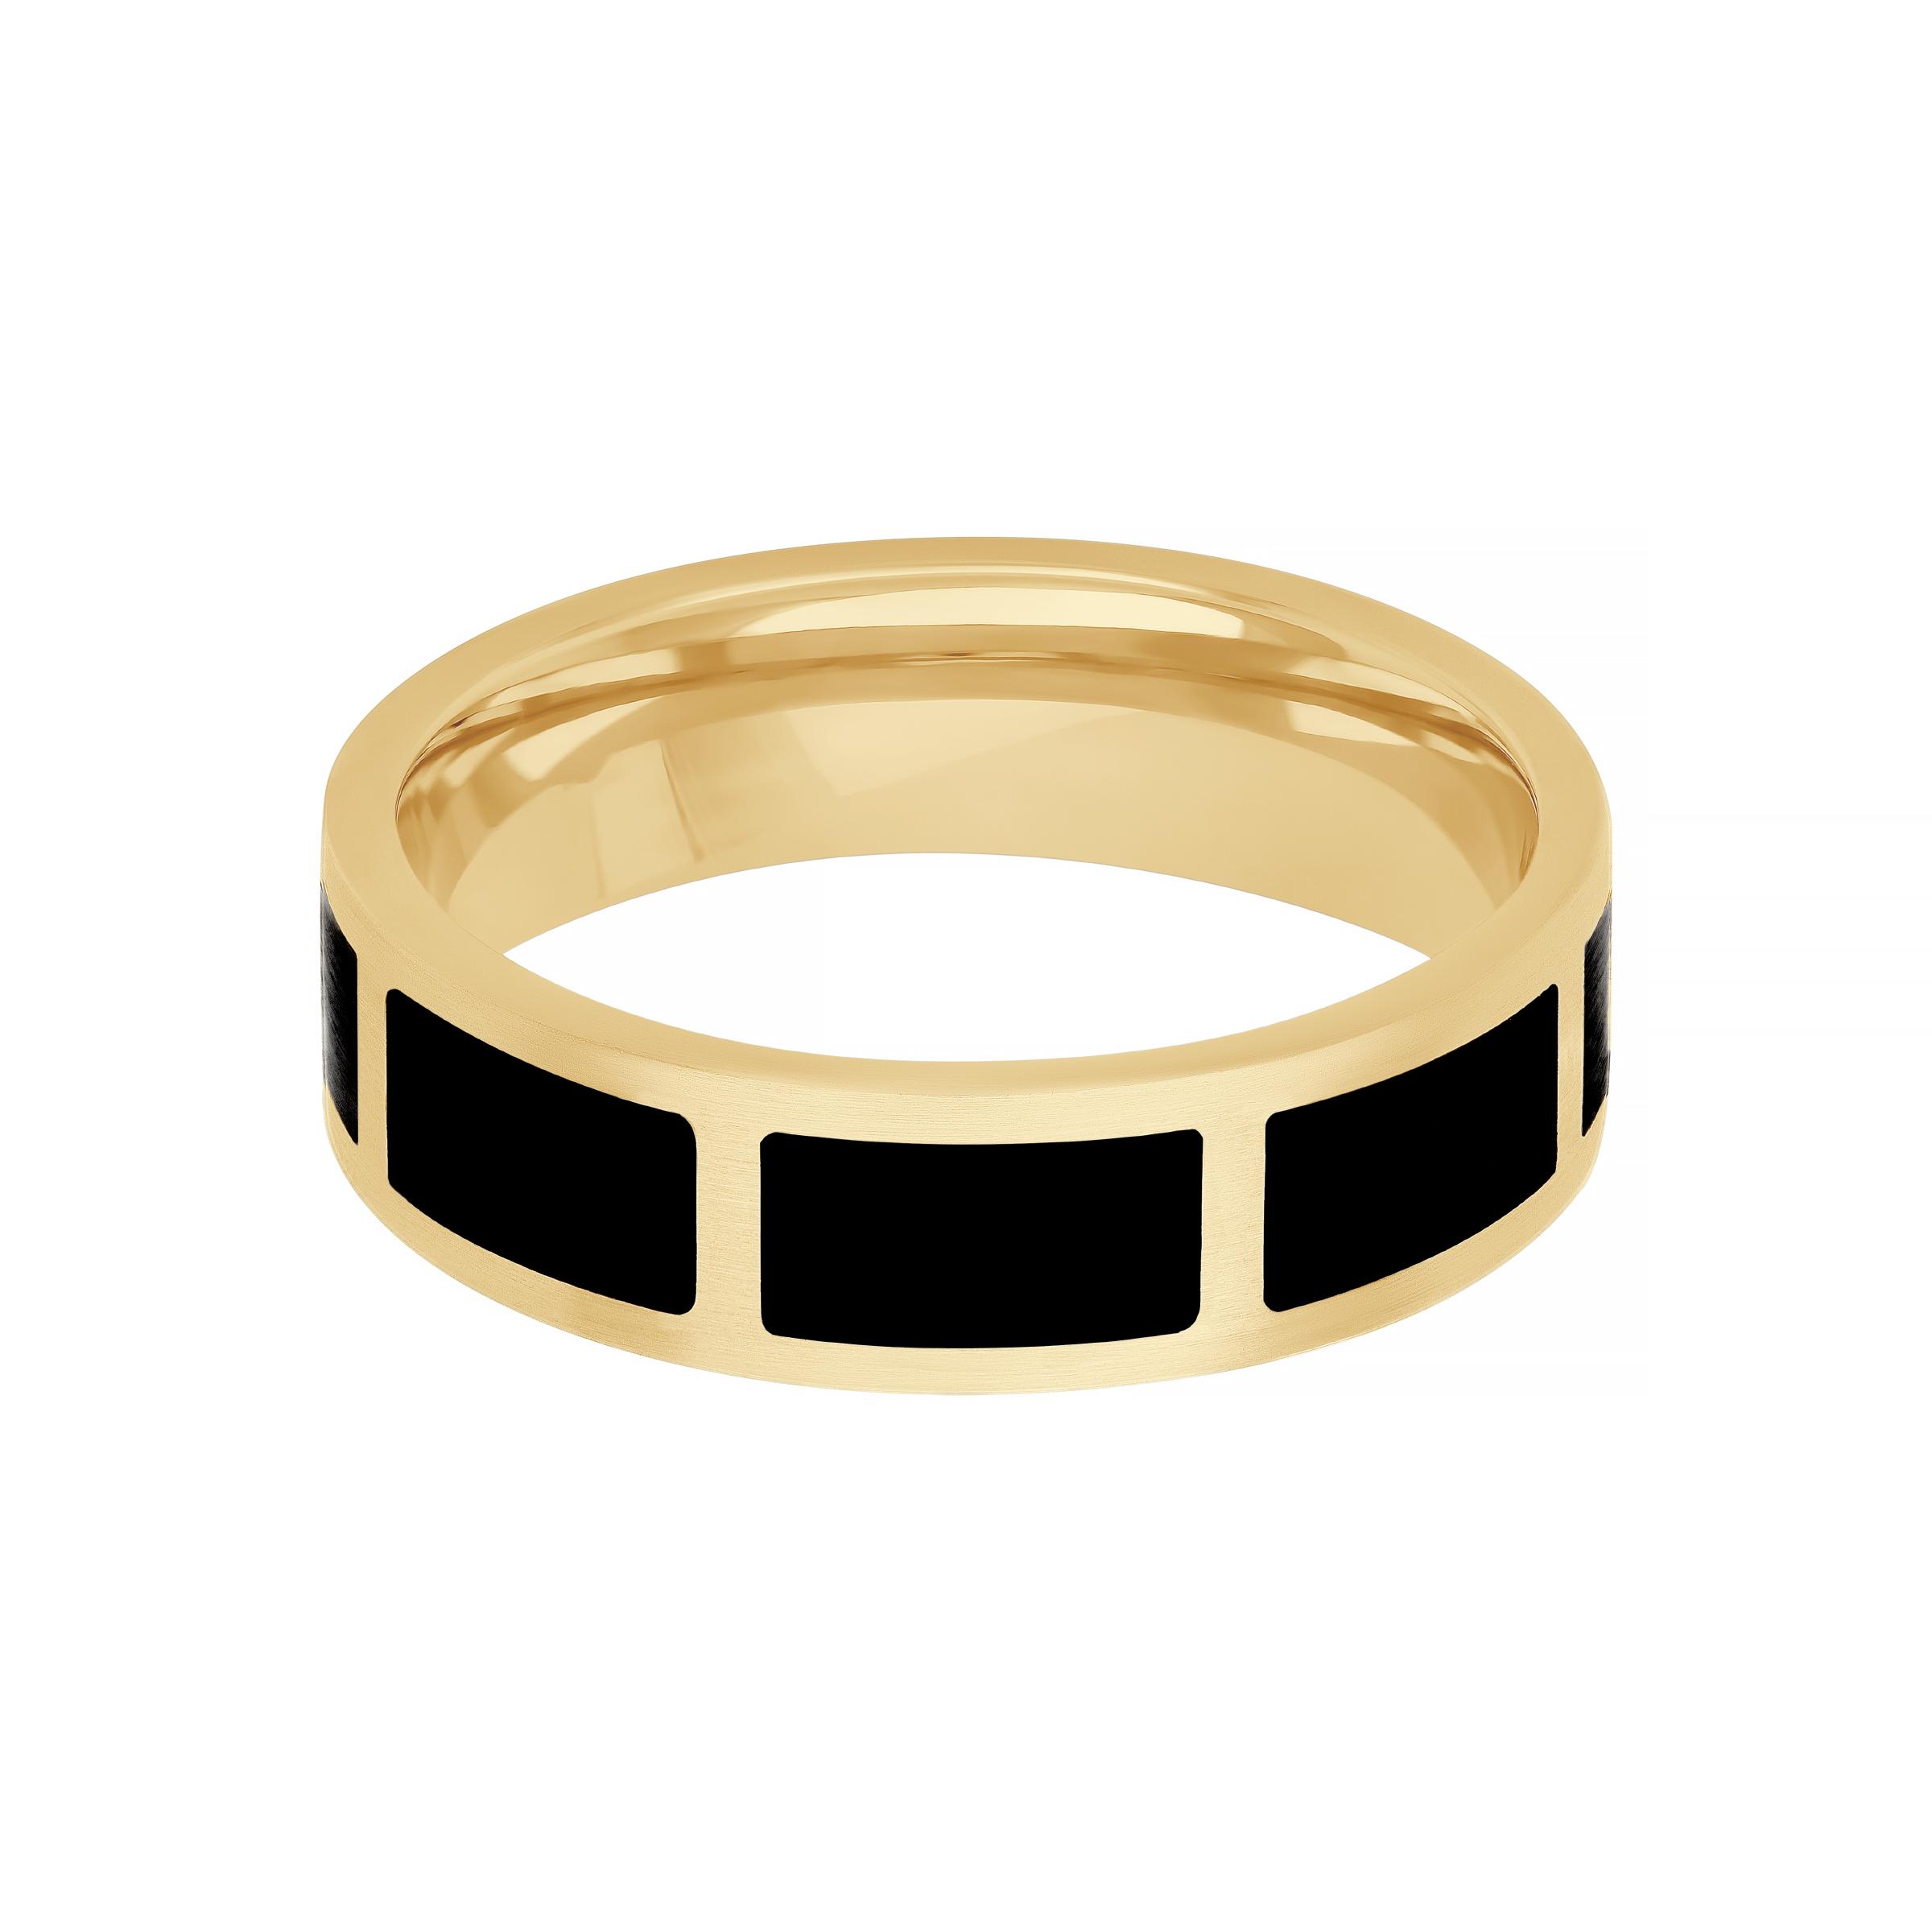 Gent's 14k Yellow Gold Band with Black Ceramic Accents